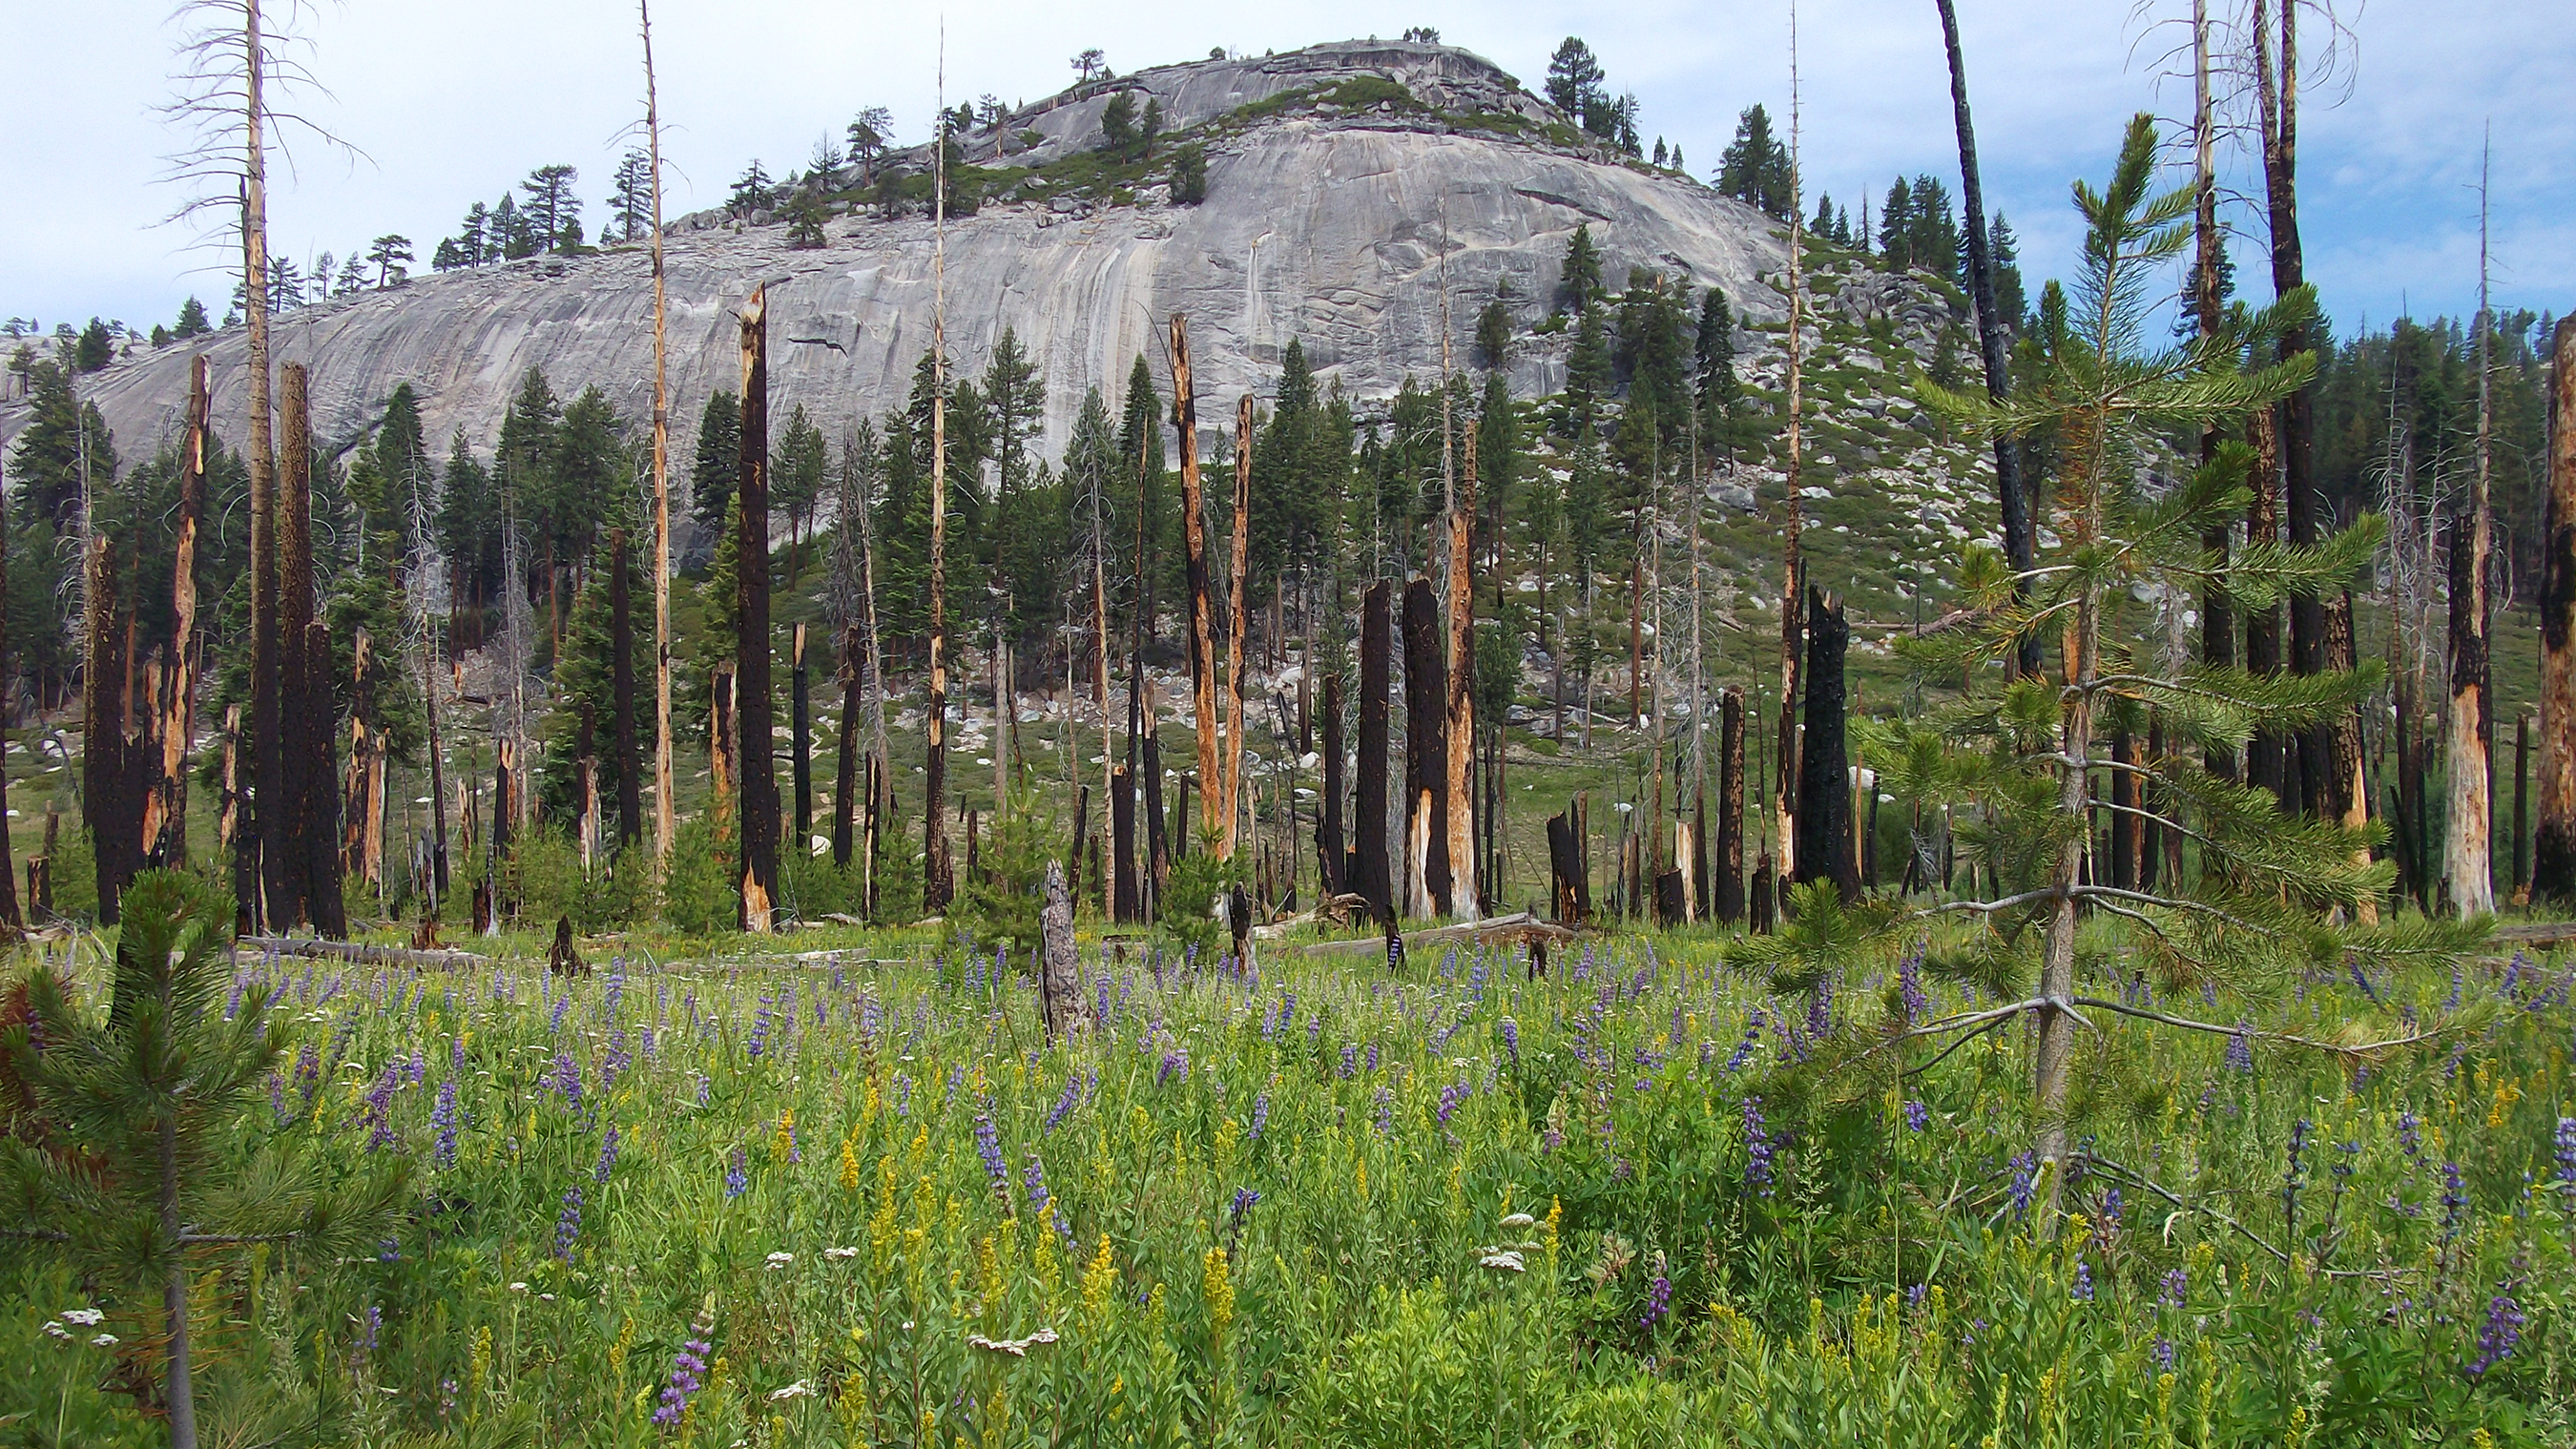 Image of the Illouette basin in Yosemite National Park.